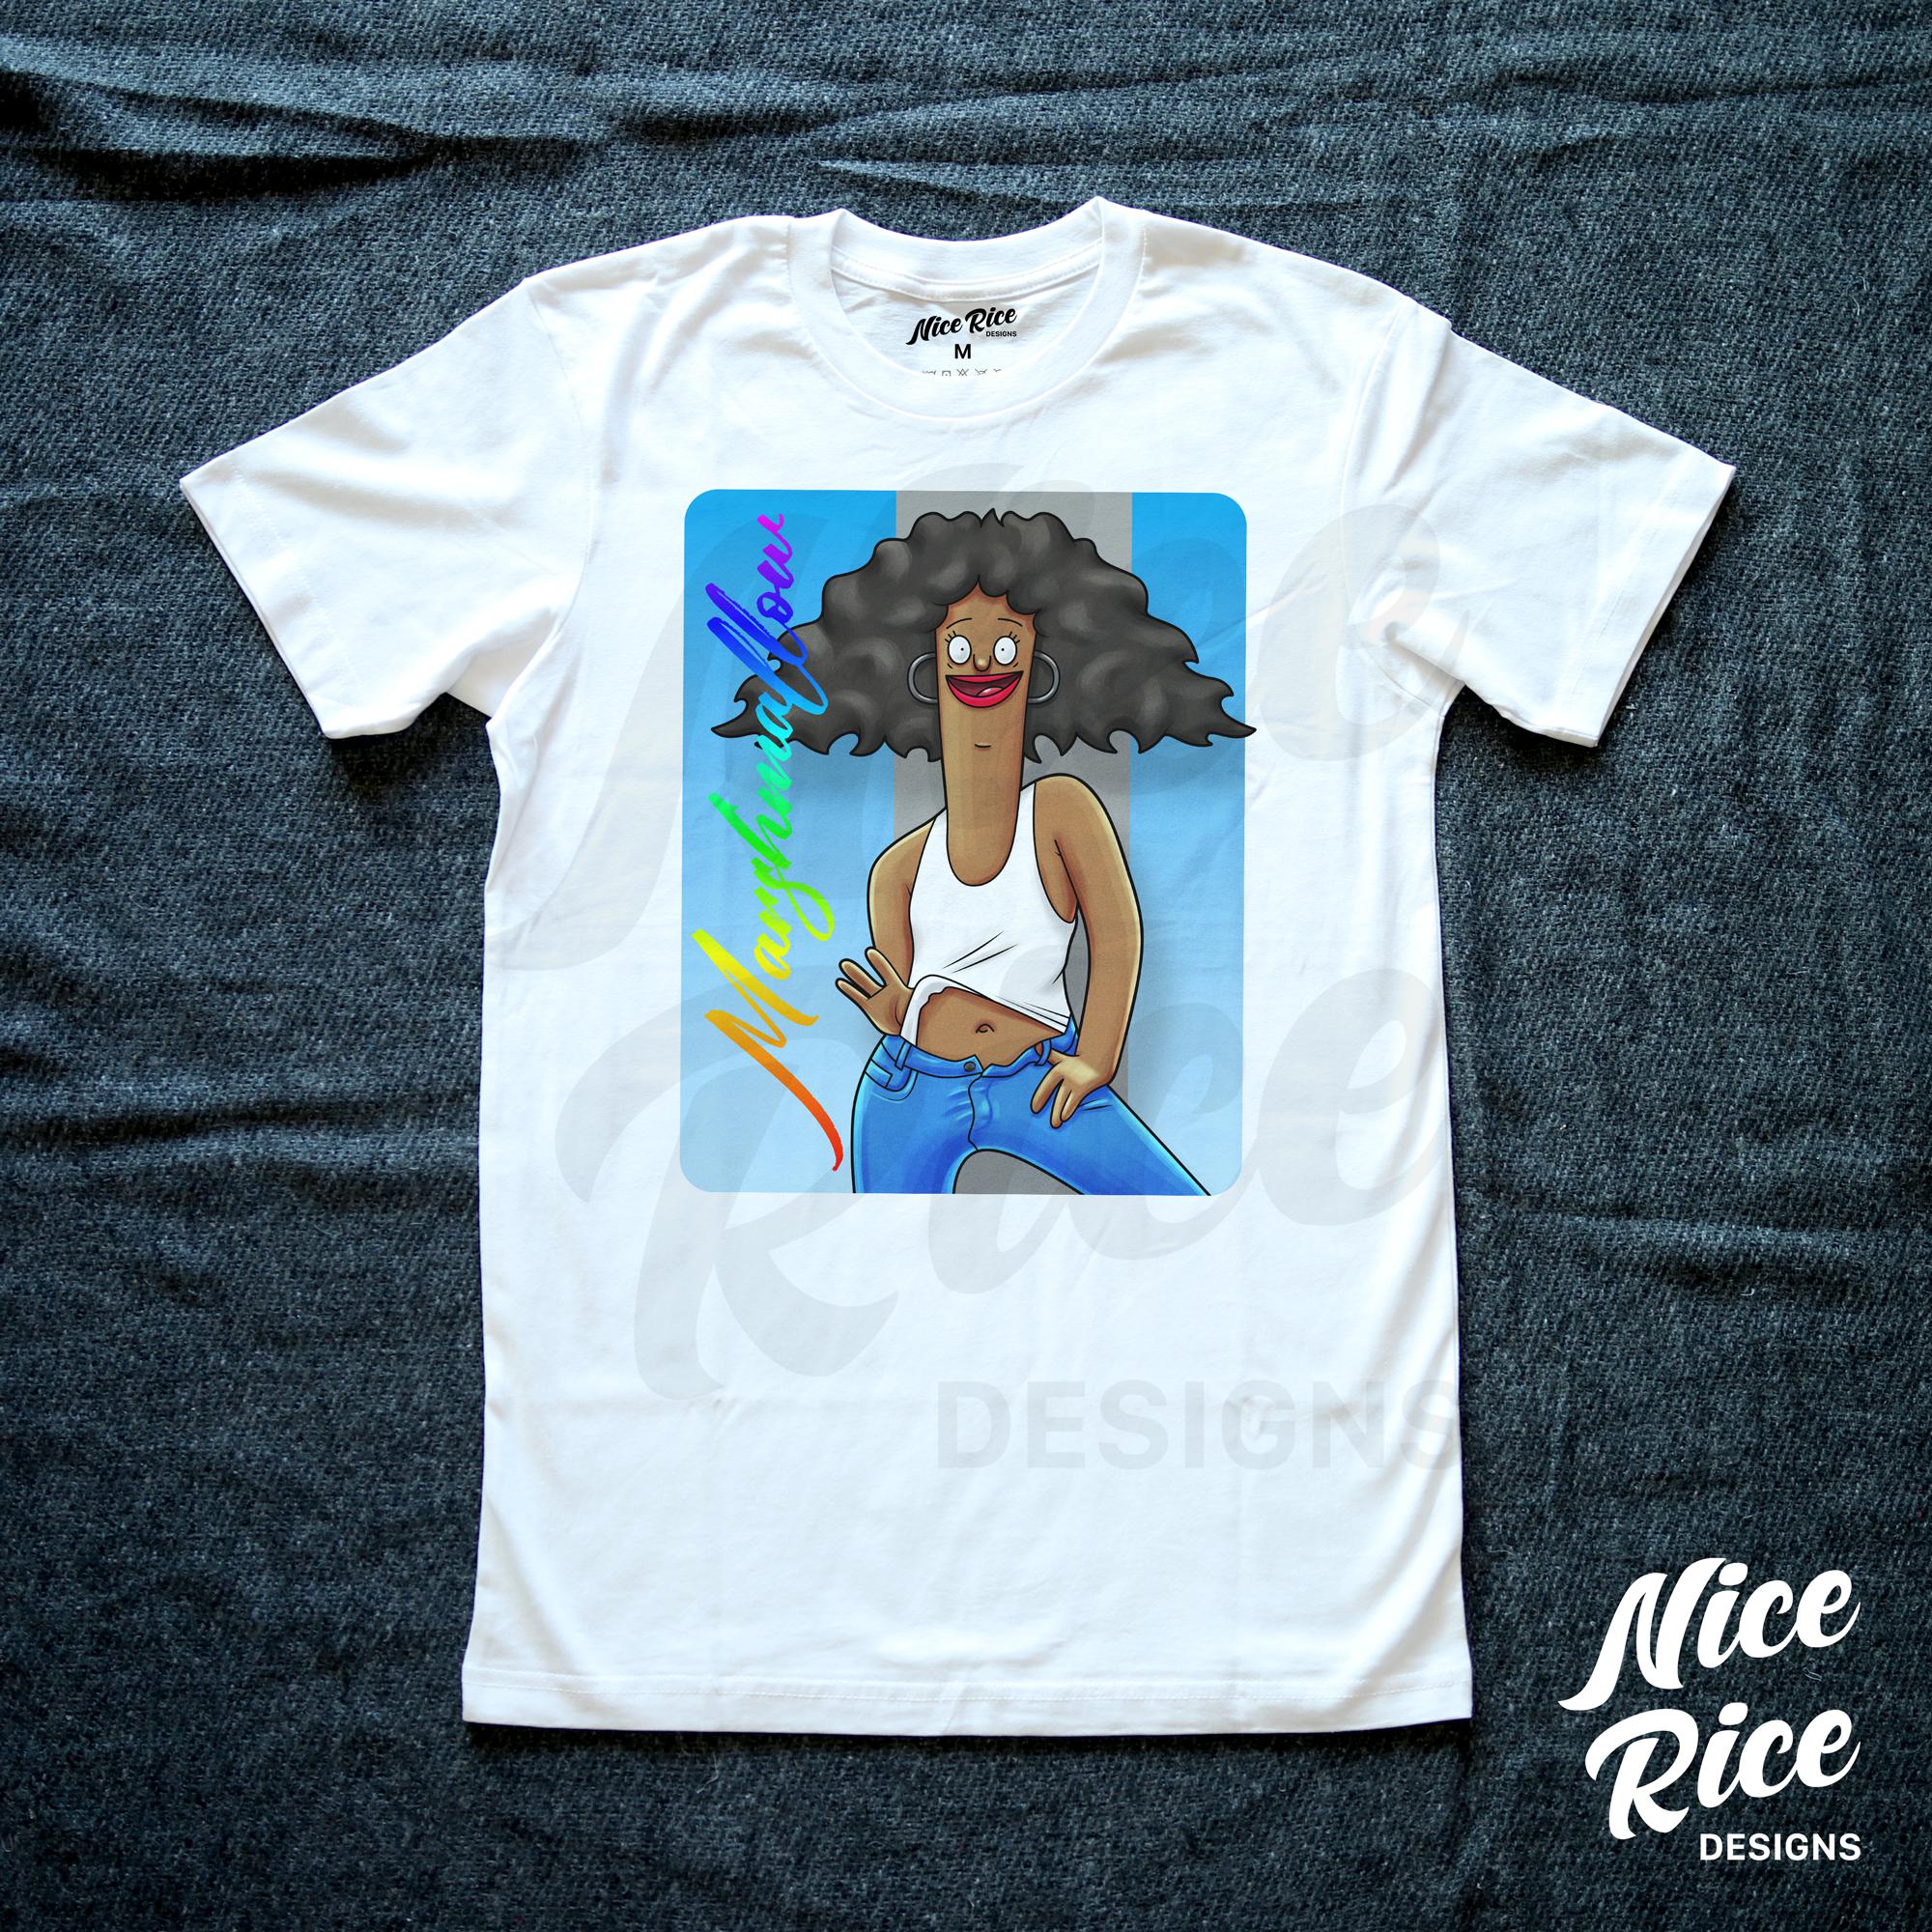 I Wanna Dance with Marshmallow Shirt by Nice Rice Designs